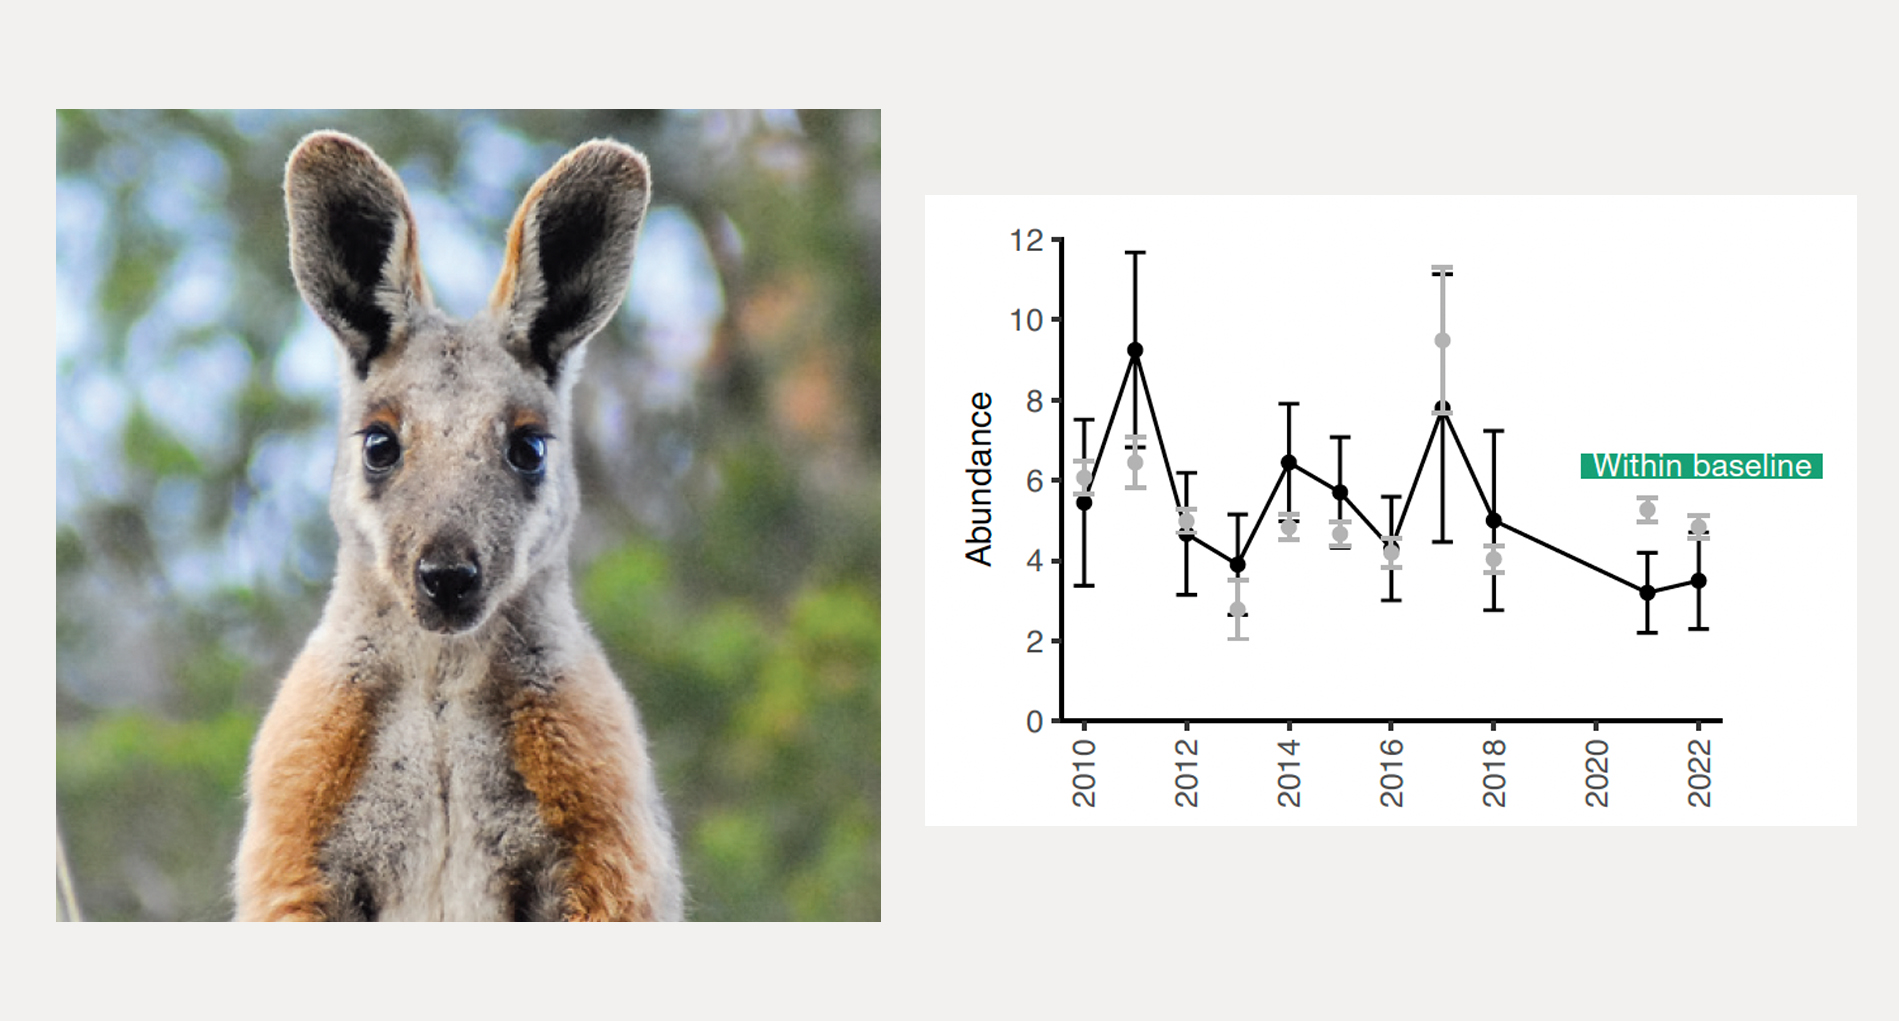 Yellow-footed Rock-wallaby (Petrogale xanthopus) abundance at Buckaringa. Black: mean (± error) number of individuals per site. Grey: baseline for comparison, predicted abundance based on the rainfall model. Photo: Wayne Lawler/AWC